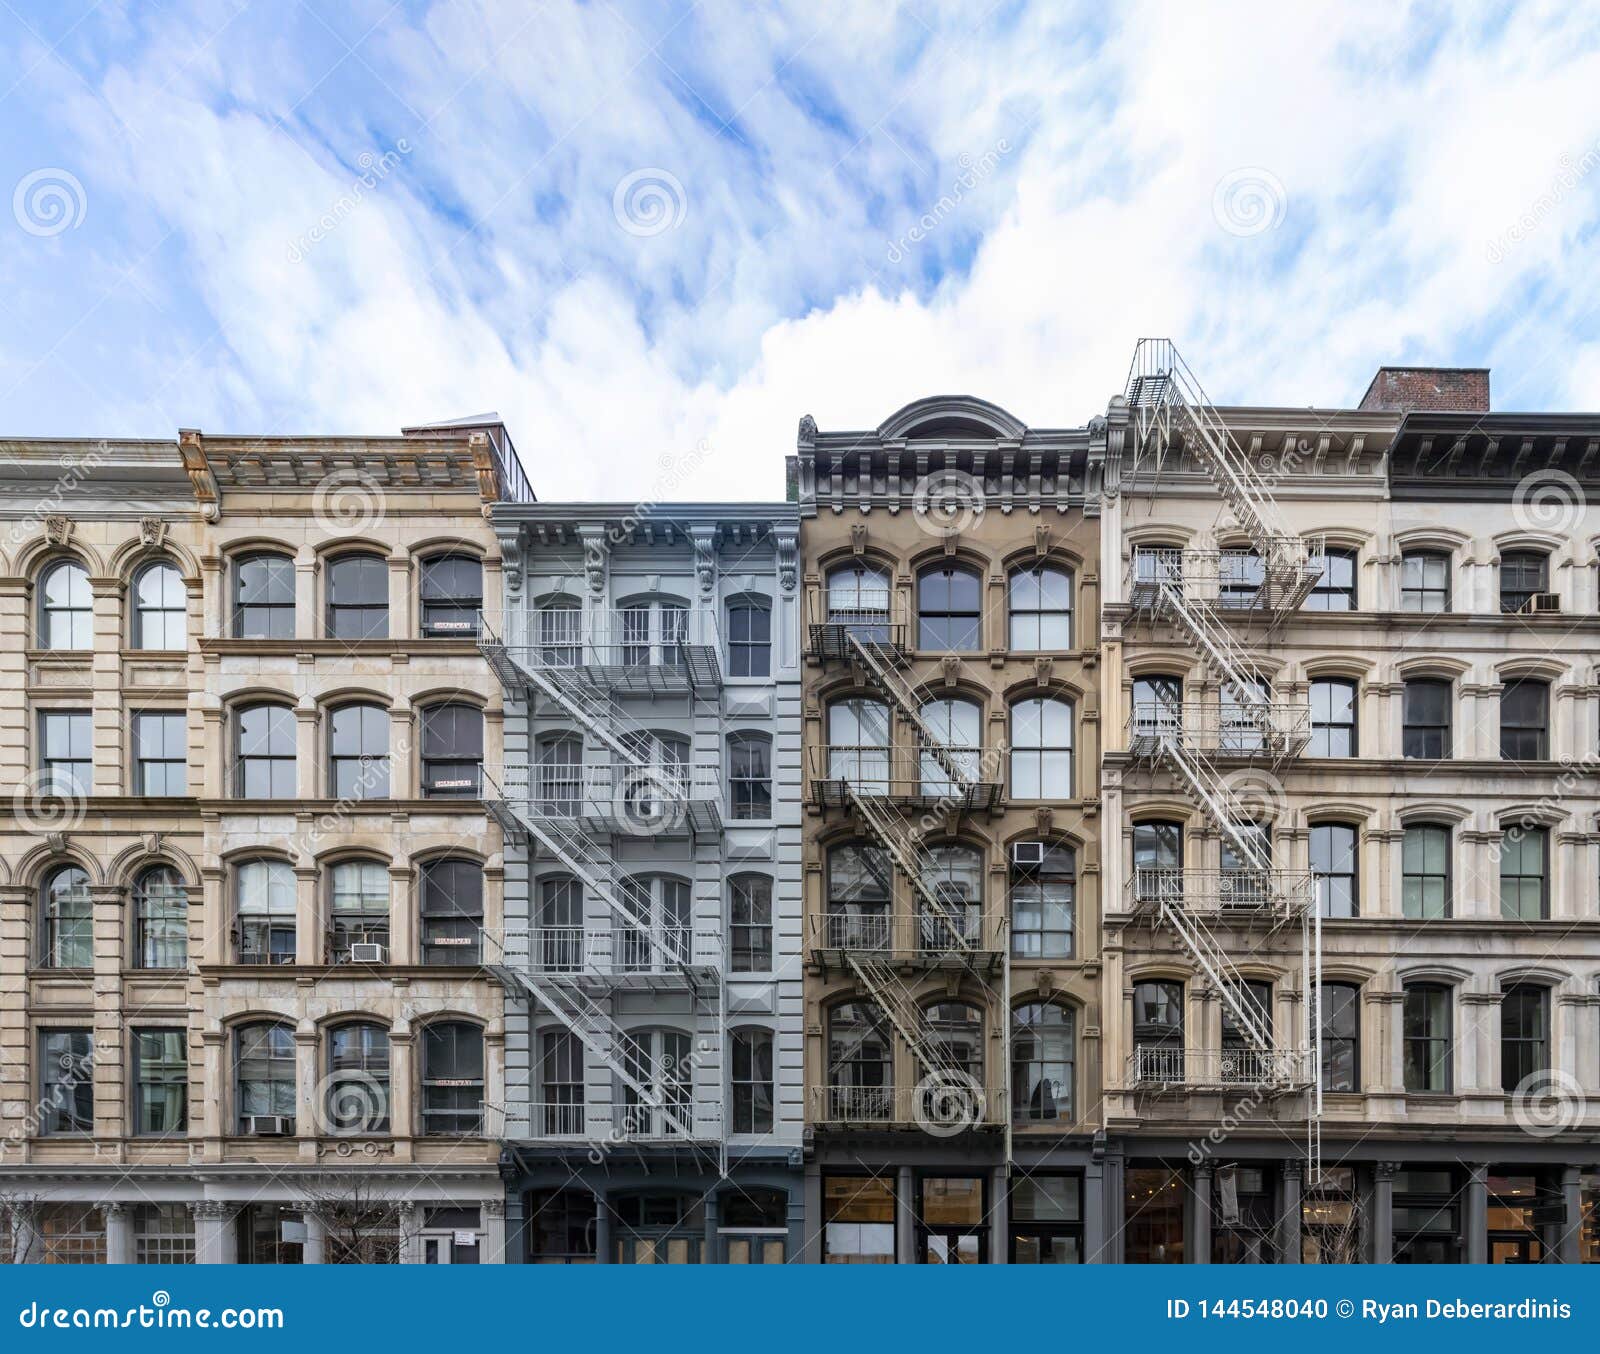 exterior view of old apartment buildings in the soho neighborhood of manhattan in new york city with empty blue sky